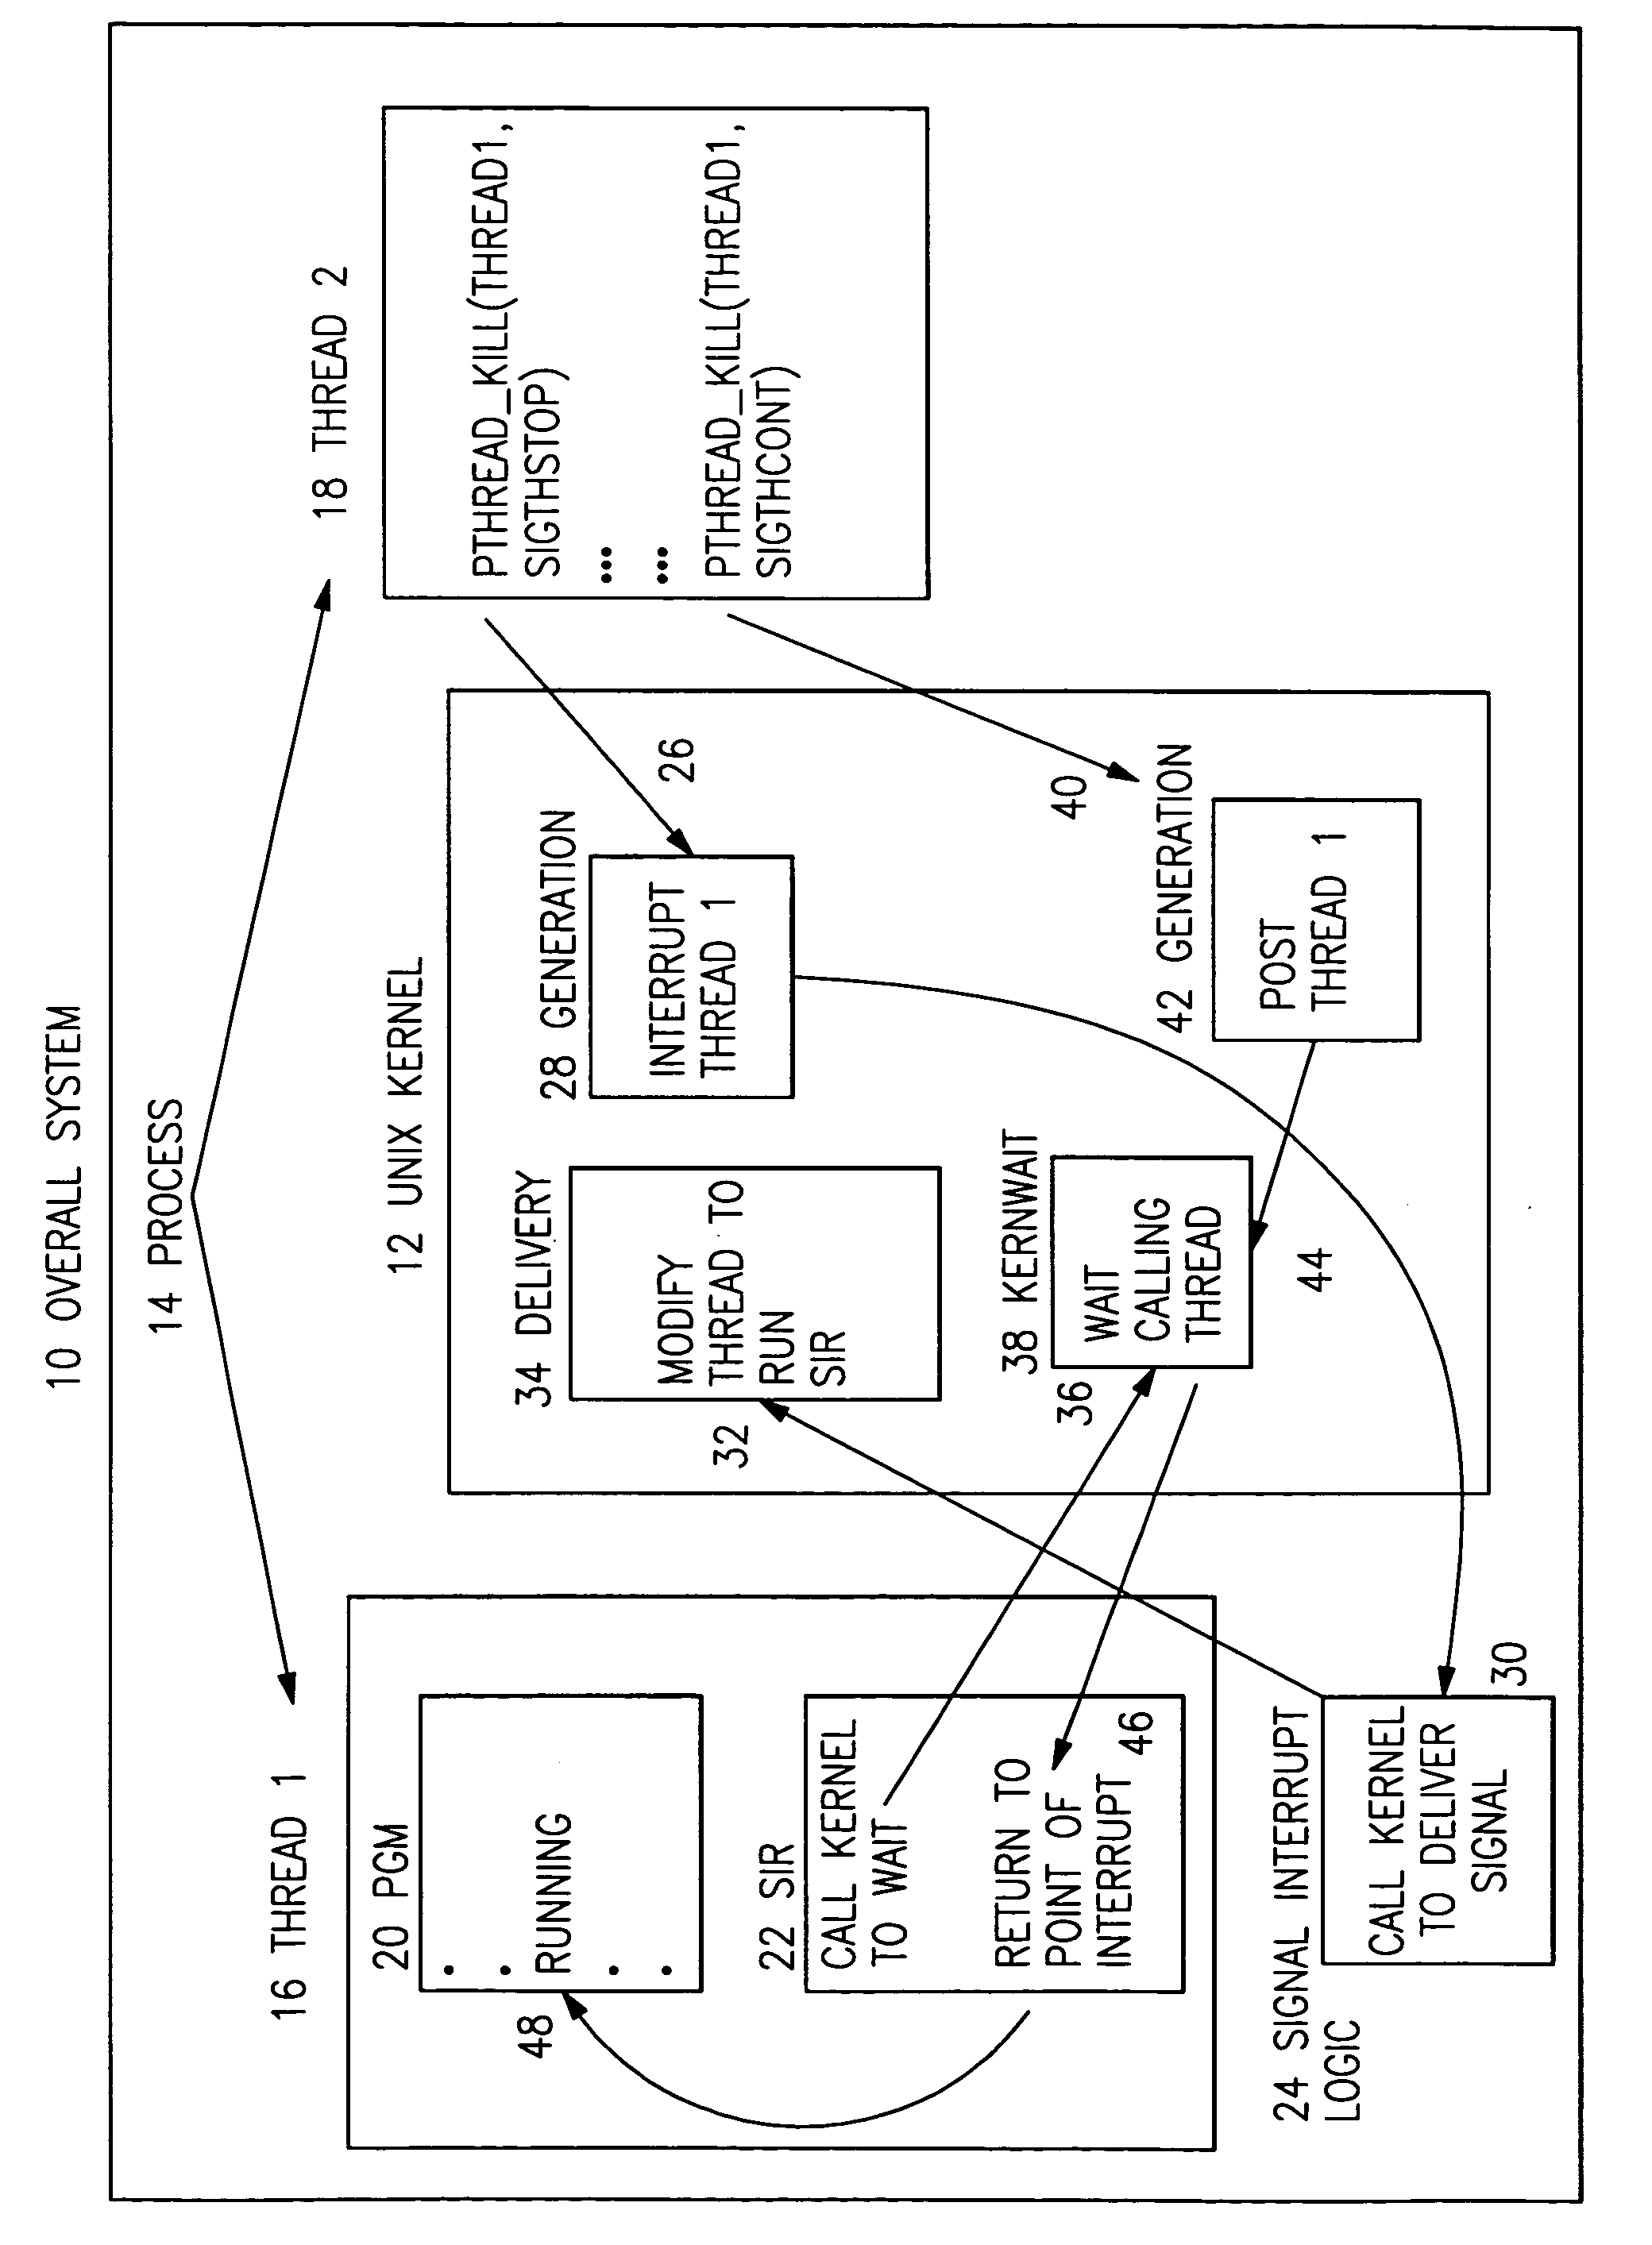 Method and apparatus for managing thread execution in a multithread application